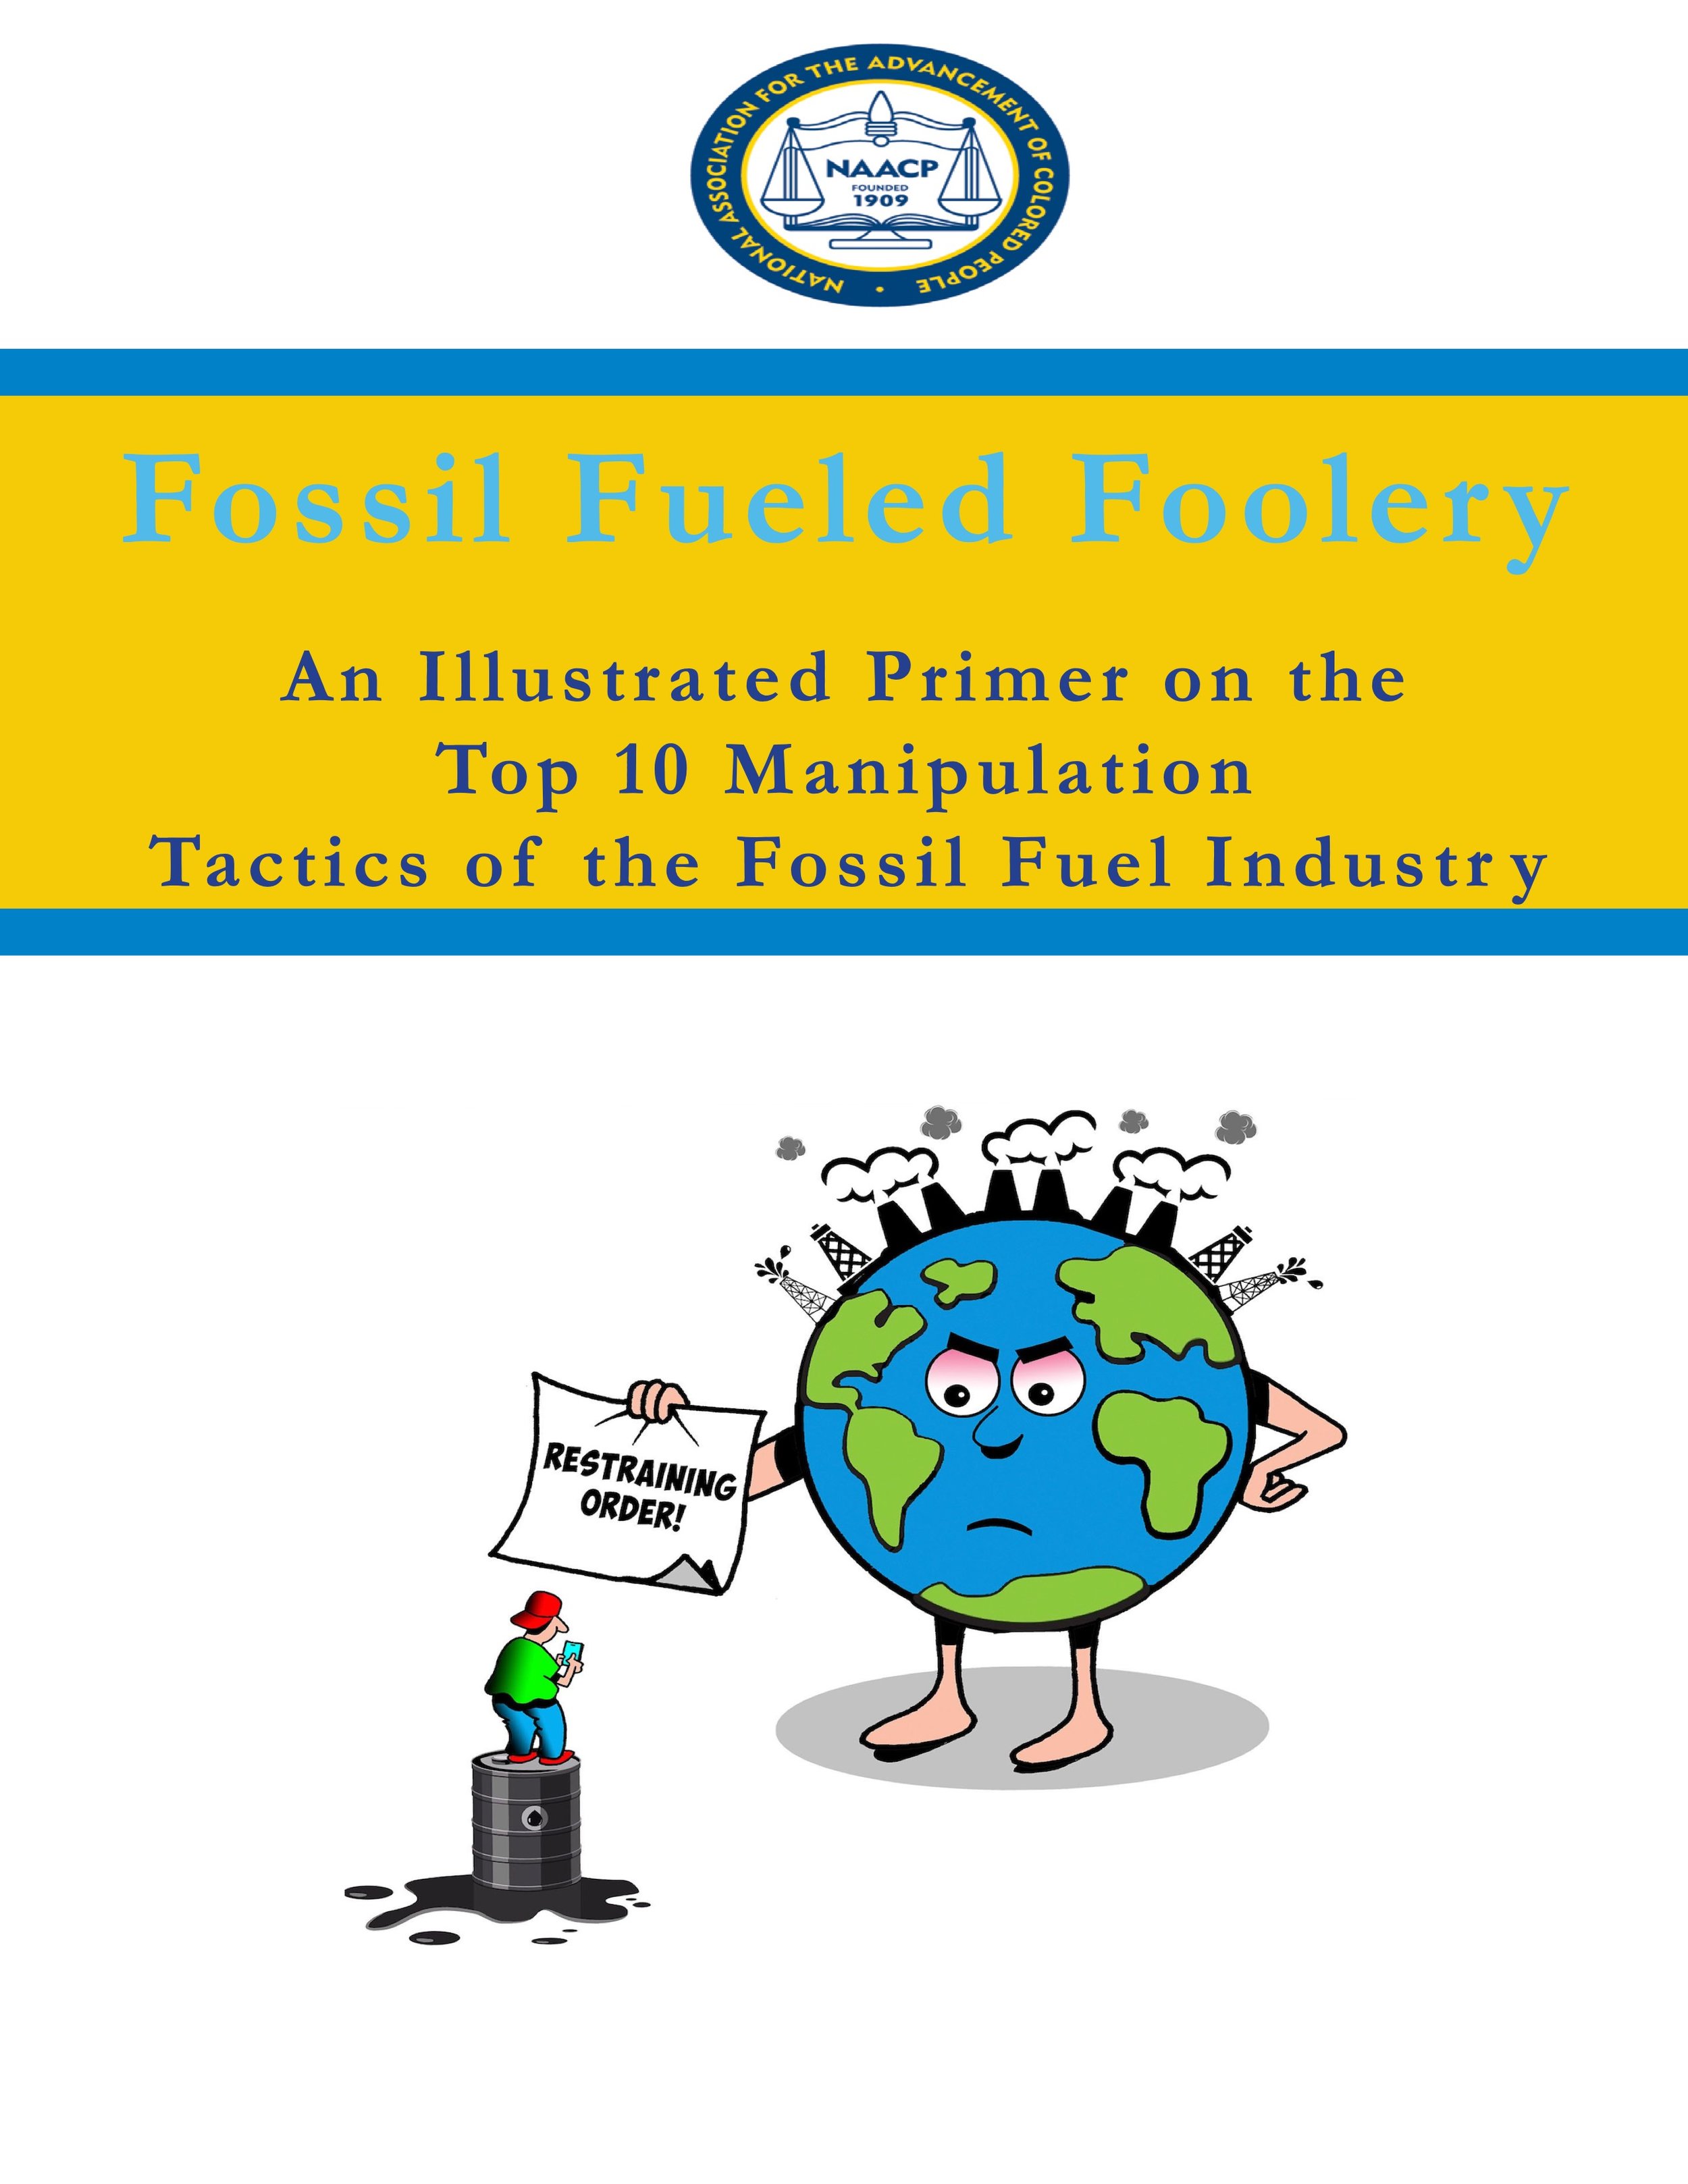 Fossil-Fueled-Foolery-An-Illustrated-Primer-on-the-Top-10-Manipulation-Tactics-of-the-Fossil-Fuel-Industry.jpeg